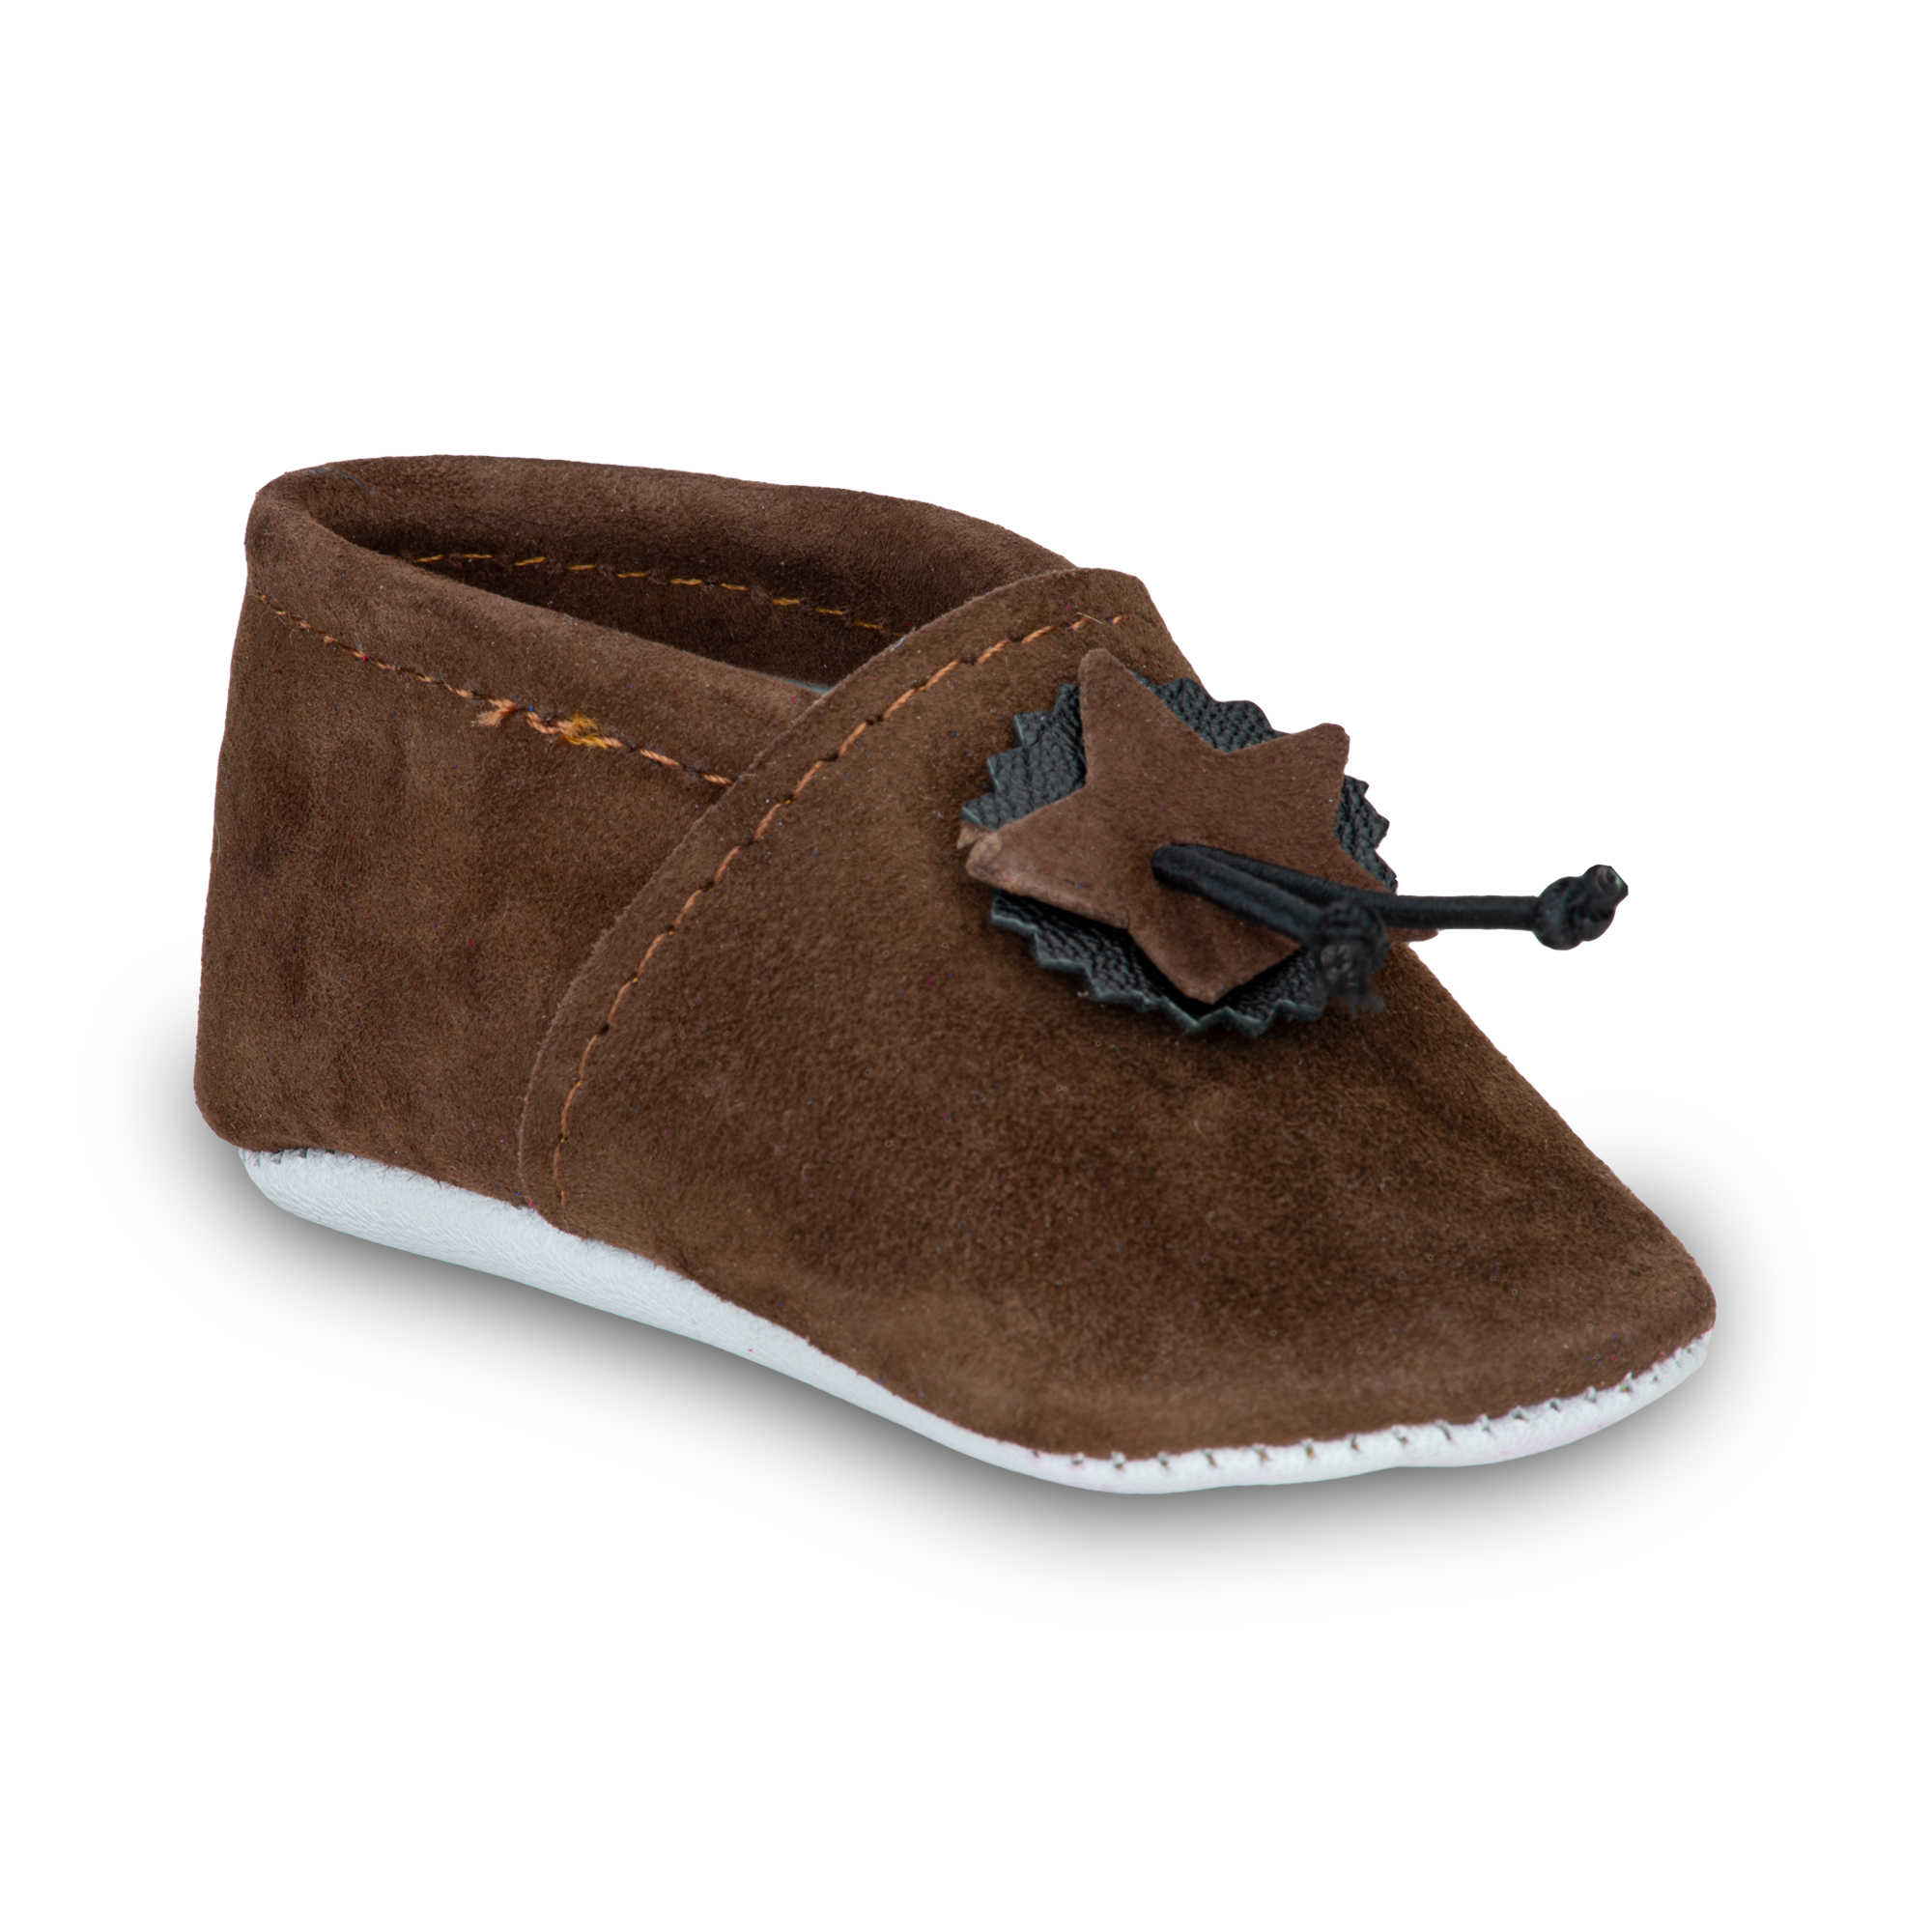 Chaussons souples bebe marron taille 24